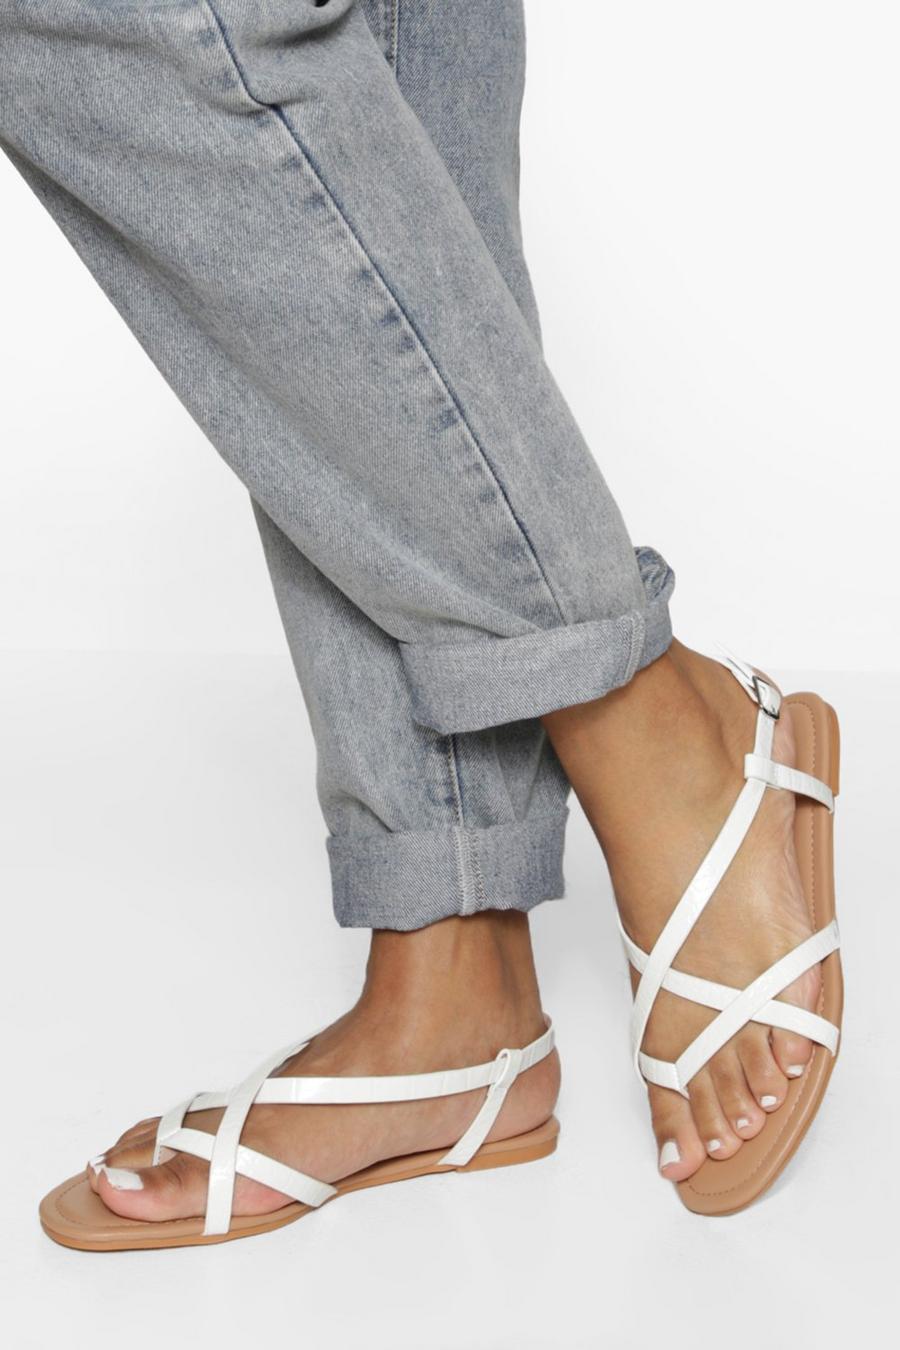 White Wide Width Croc Toe Post Basic Strappy Sandal